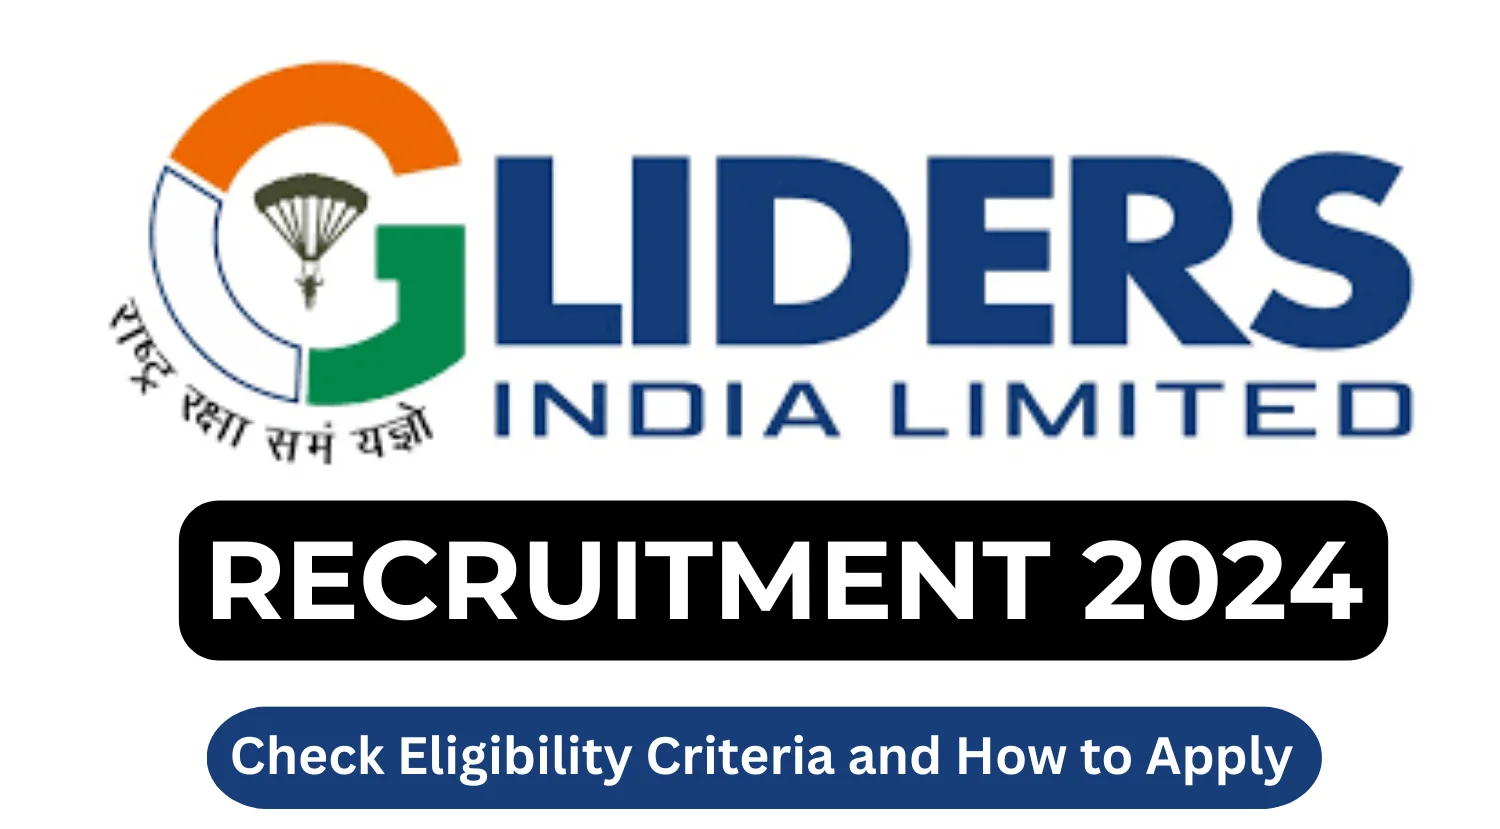 Gliders India Limited Recruitment 2024